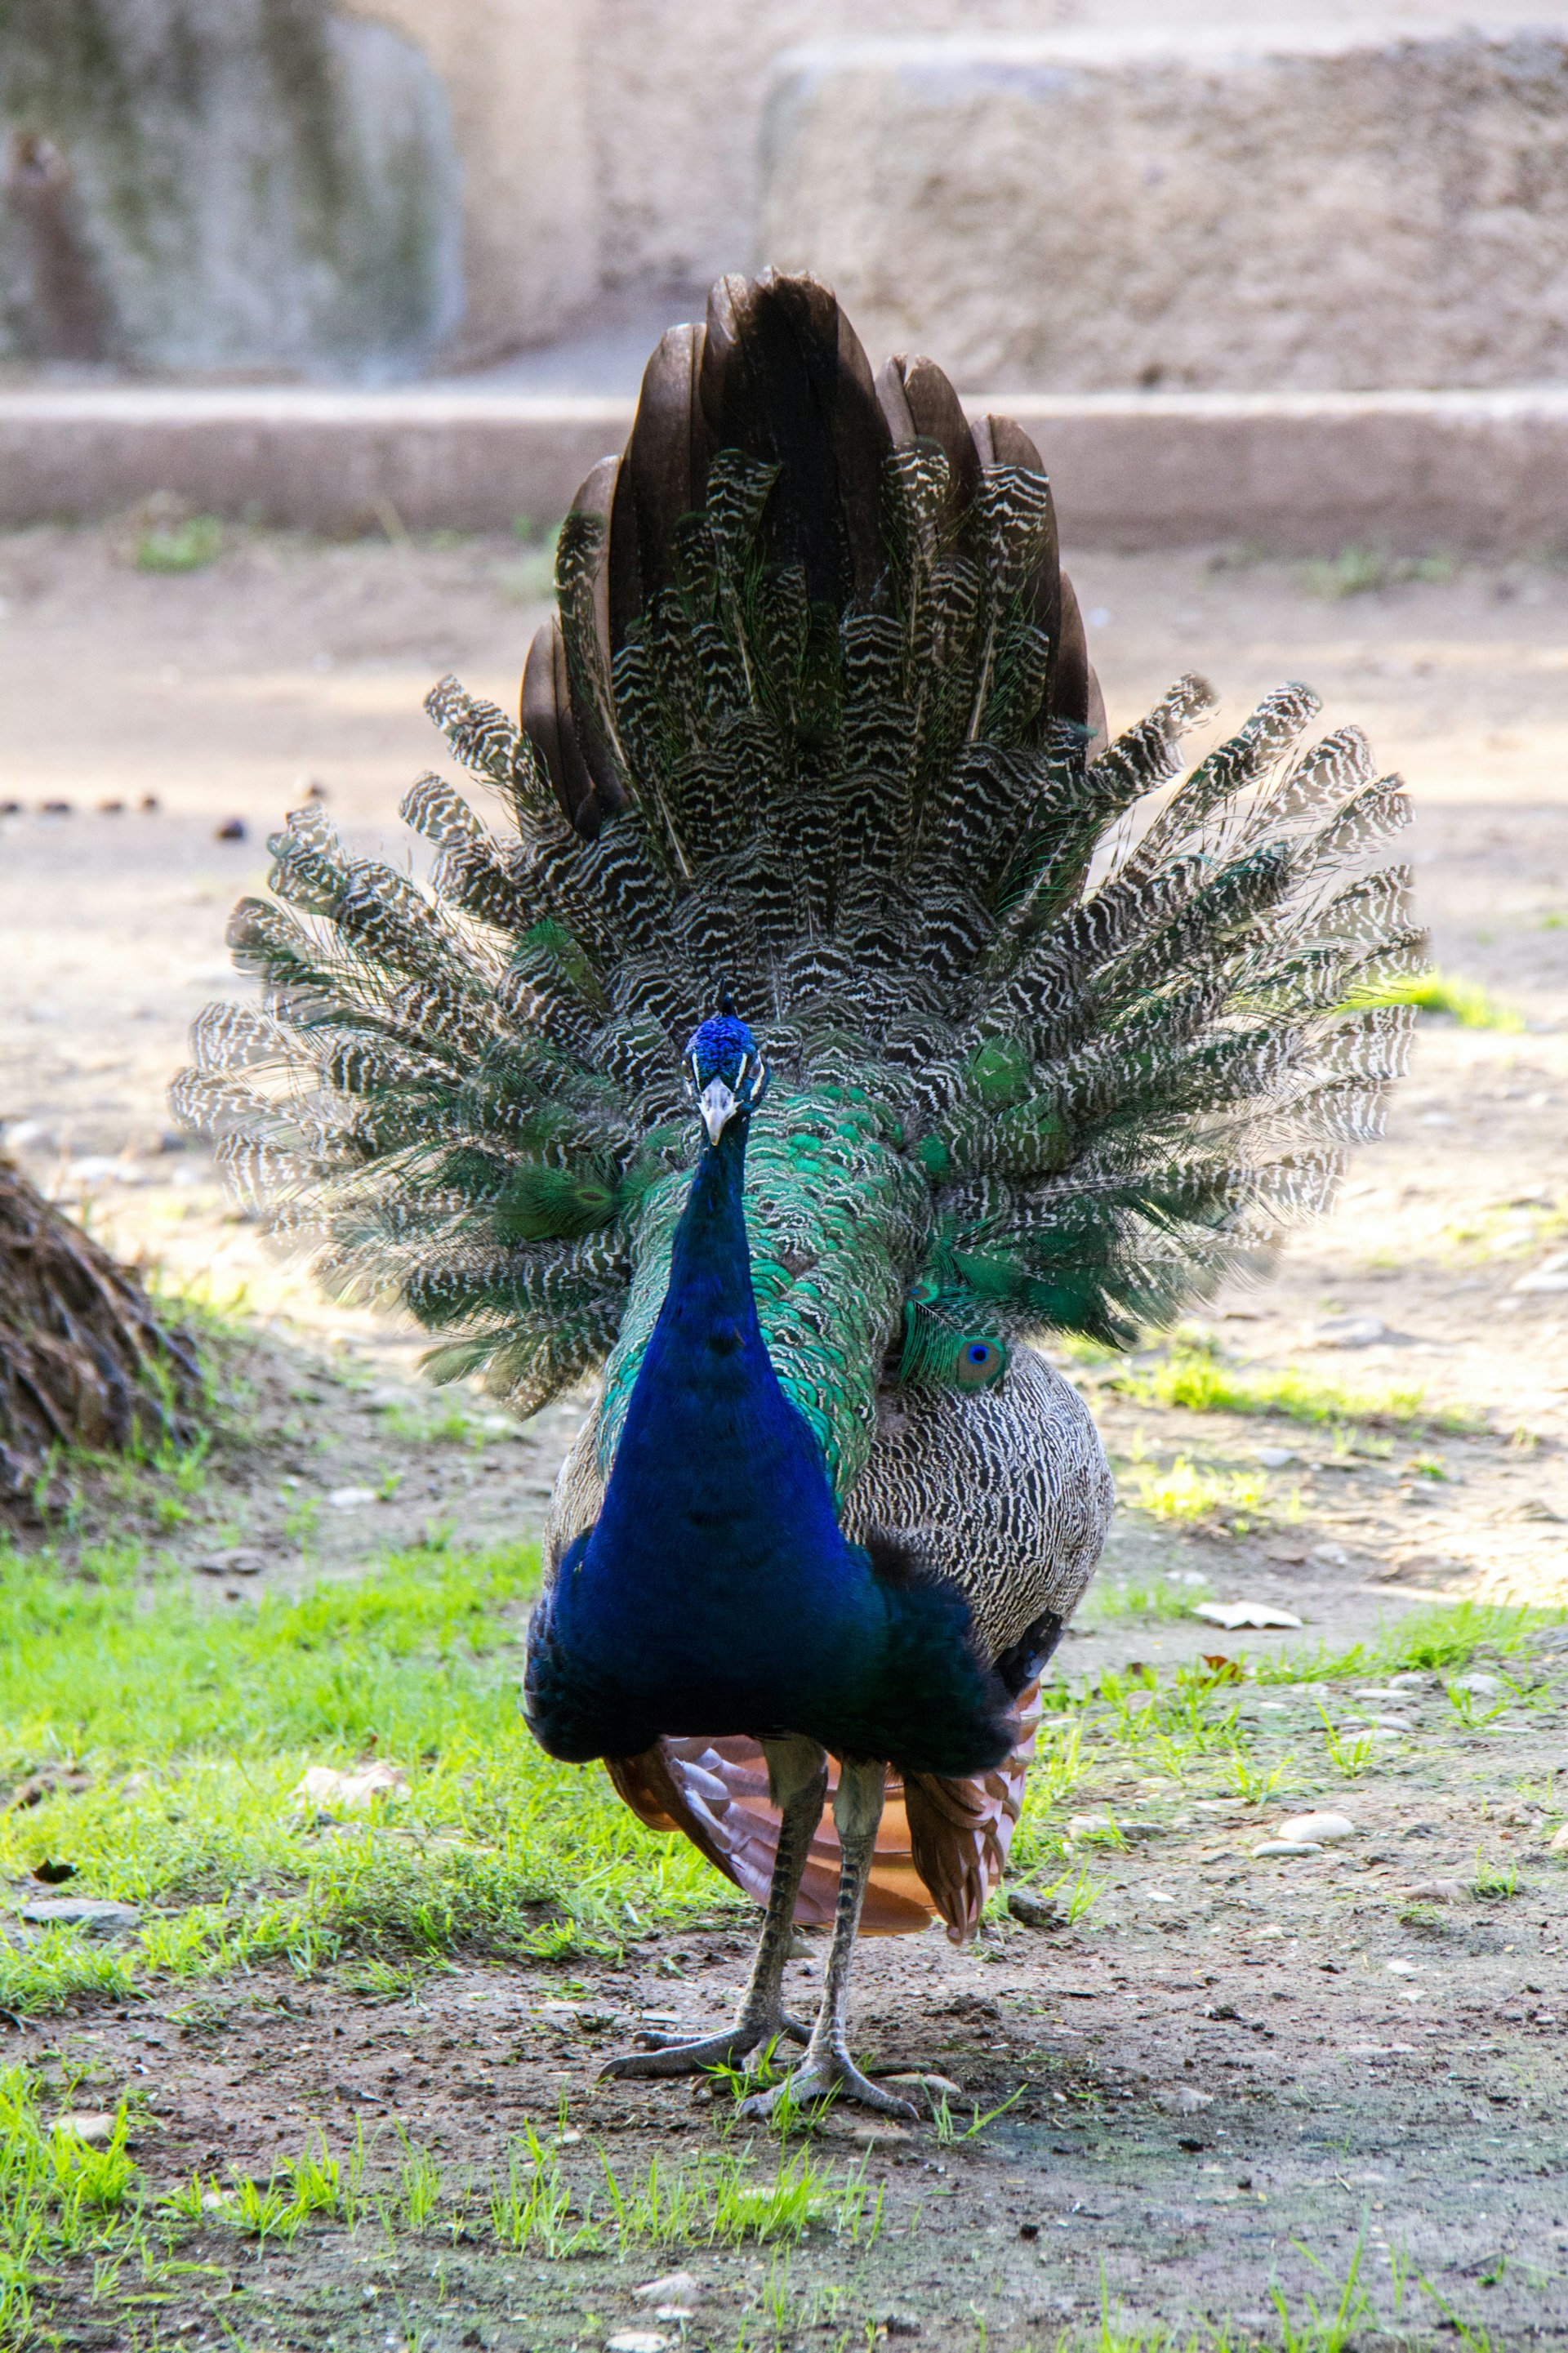 Peacock fanning its feathers in the Roman zoo.